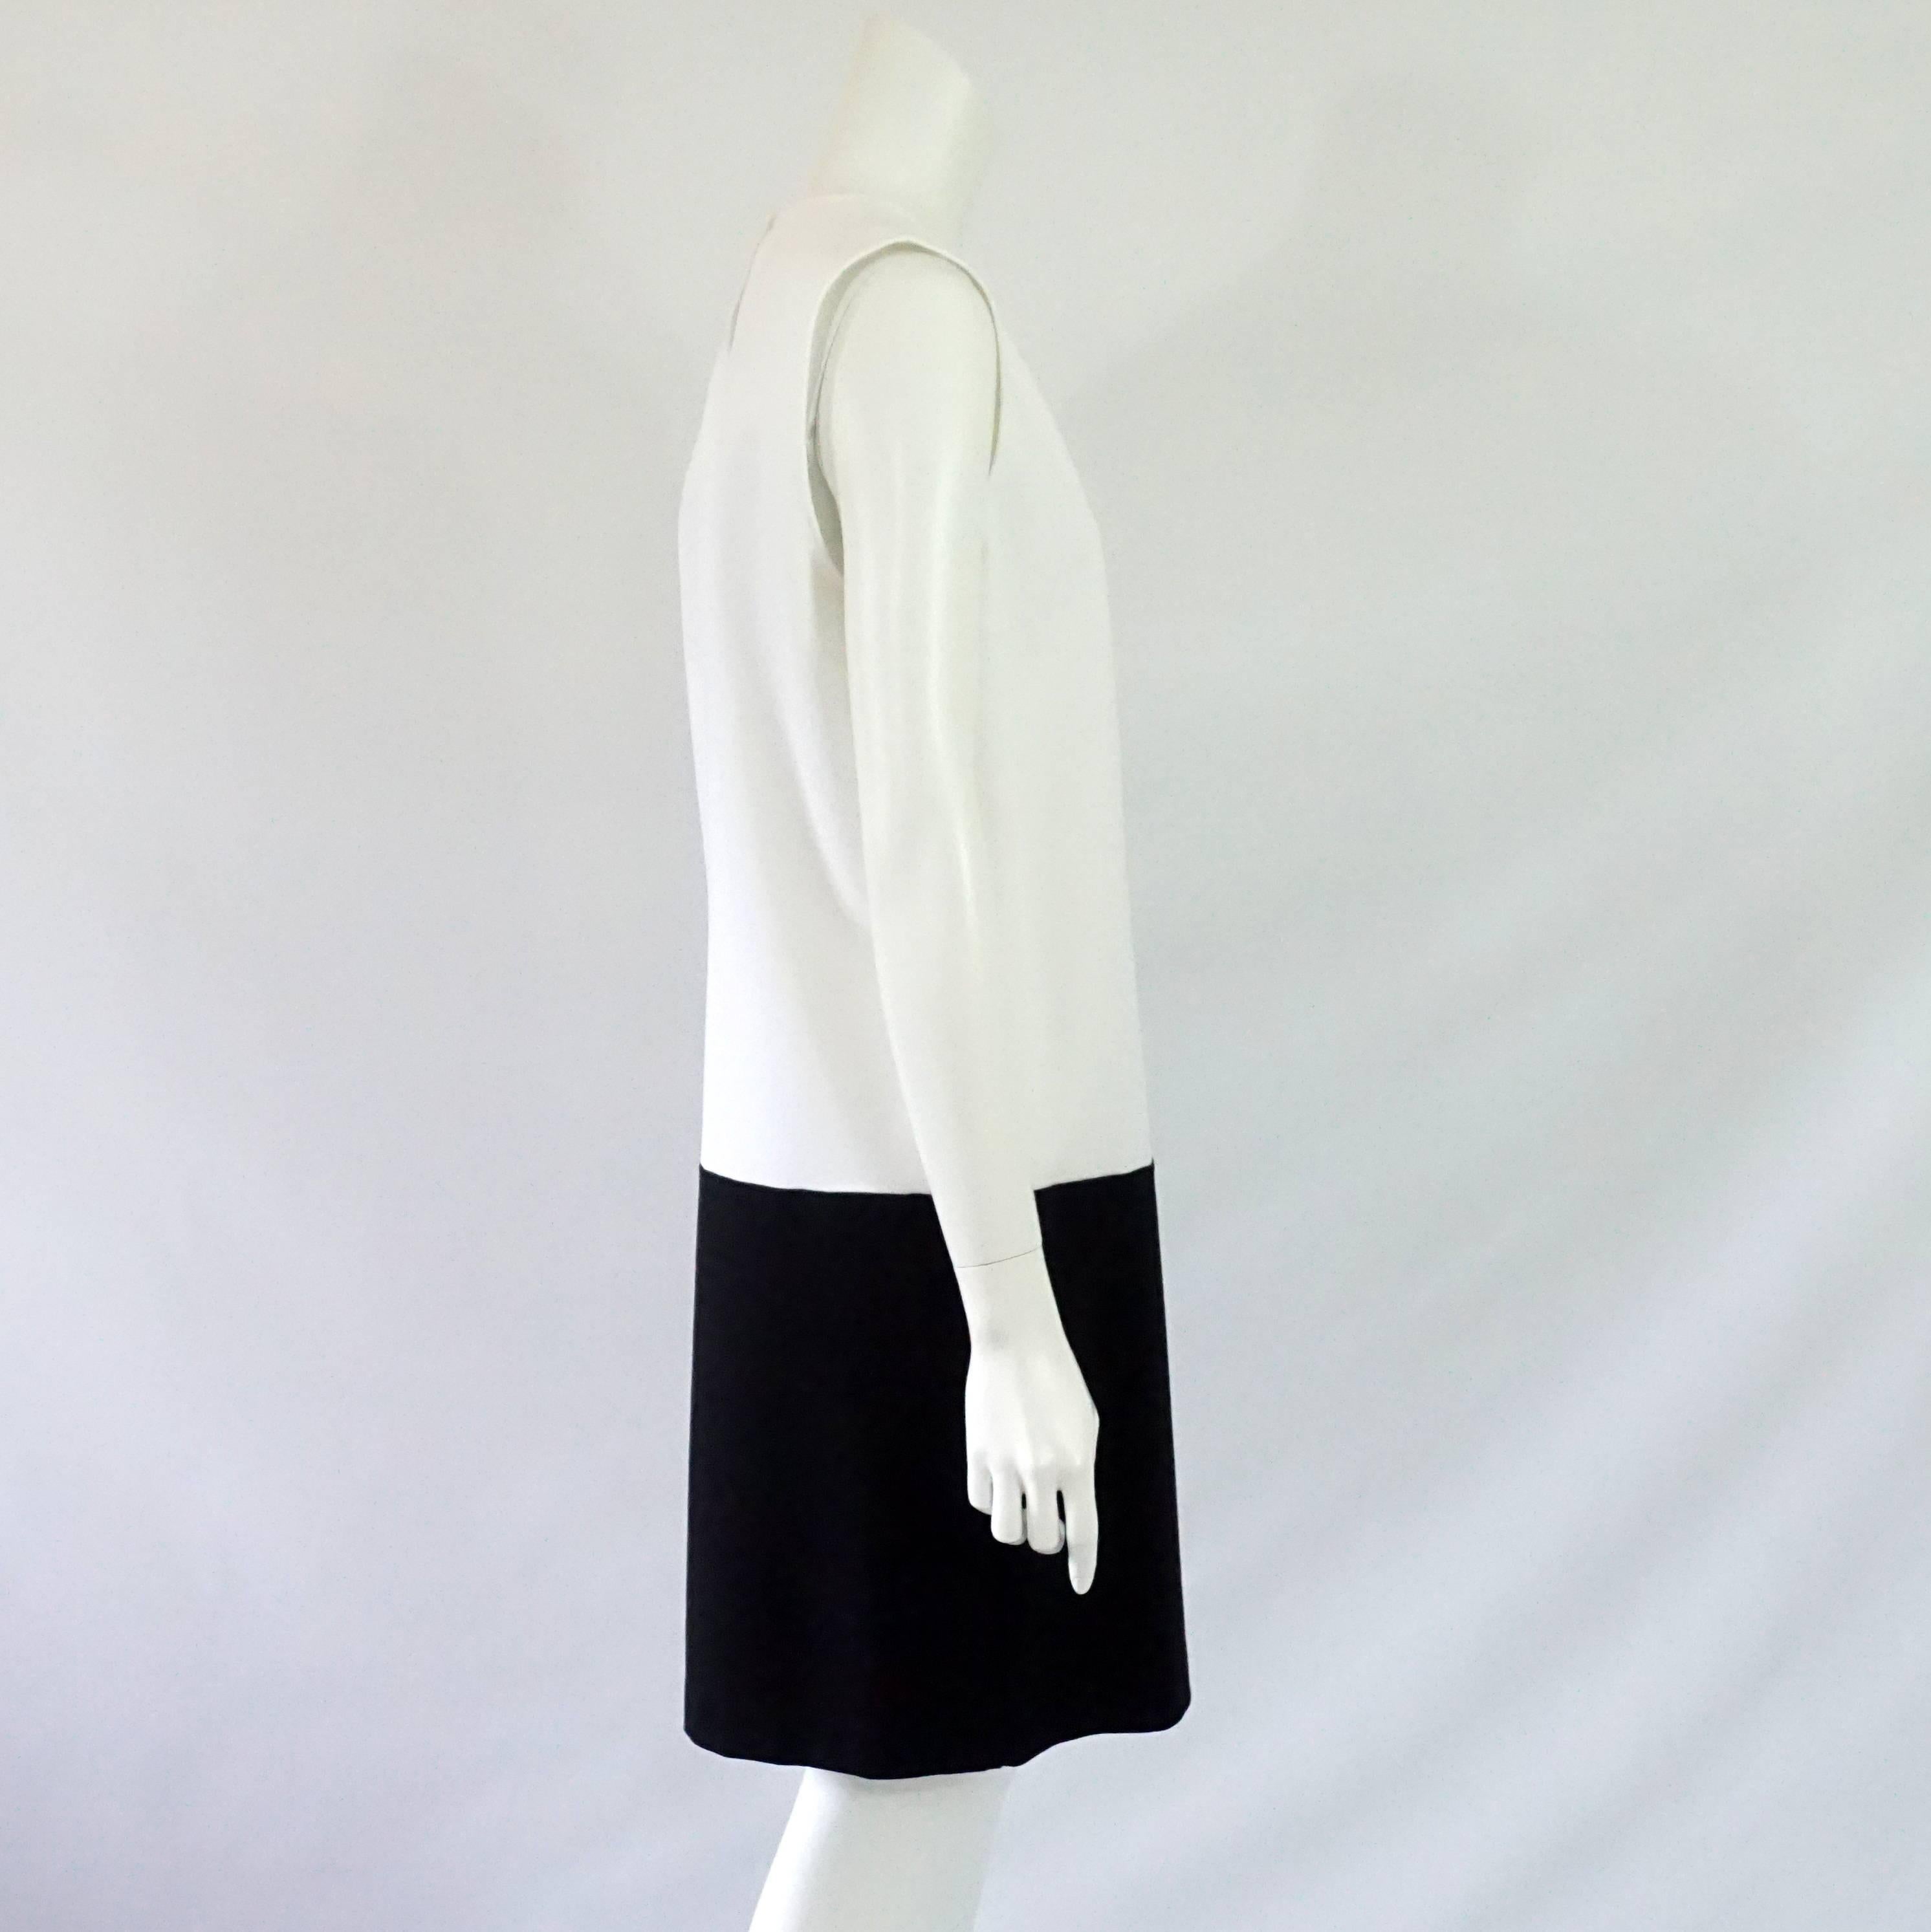 Gucci Black & White Sleeveless Shift Dress - XL - NWT  This sleeveless shift dress is made of a thick viscose/rayon blend, with the top being white and the bottom from the hip down black. It has a small gold gucci logo stitched on the left hip area.